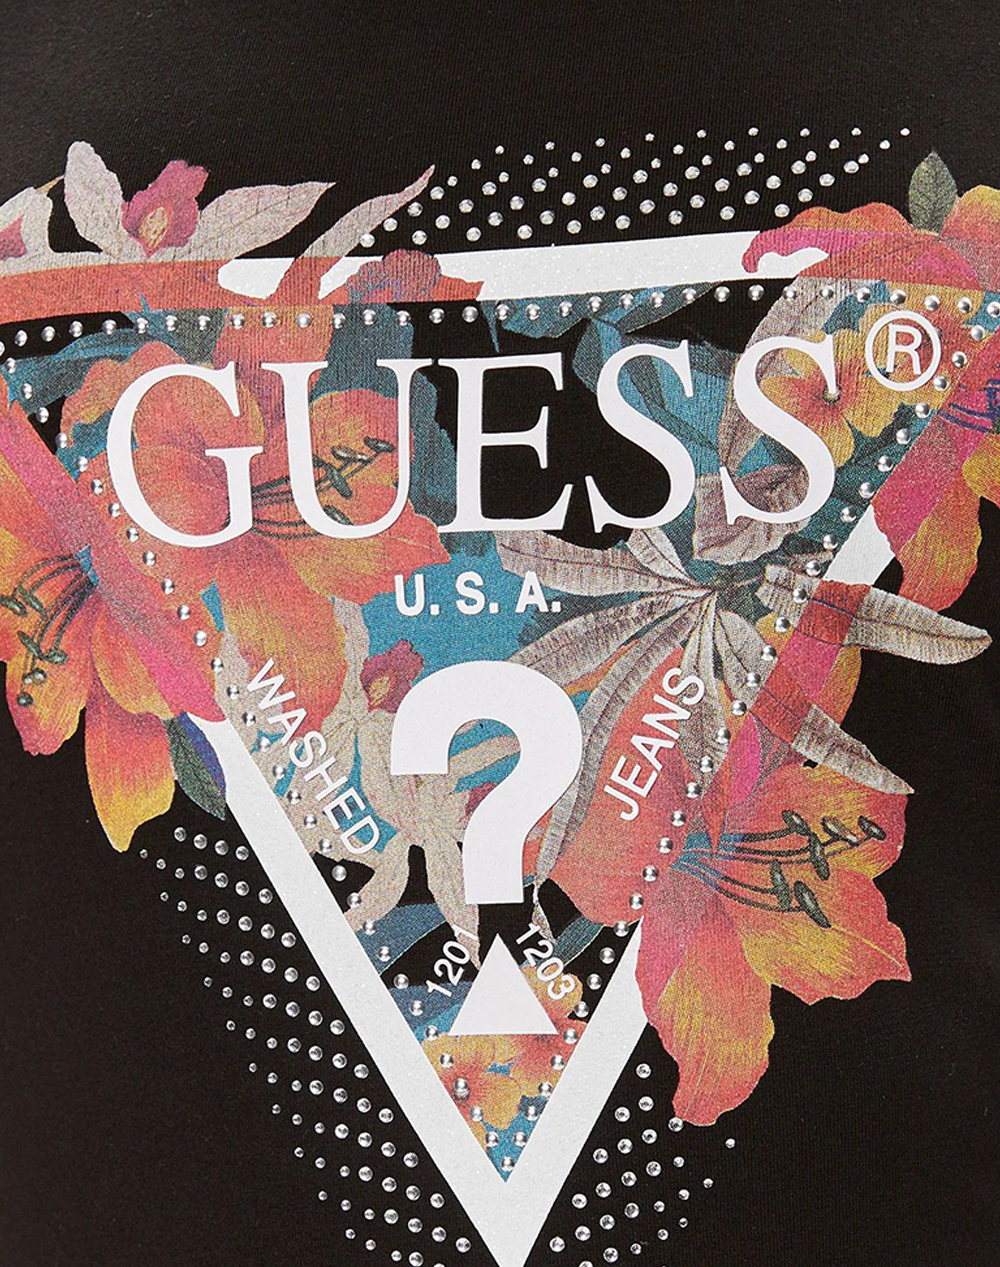 GUESS SS CN TROPICAL TRIANGLE TEE ΜΠΛΟΥΖΑ ΓΥΝΑΙΚΕΙΟ